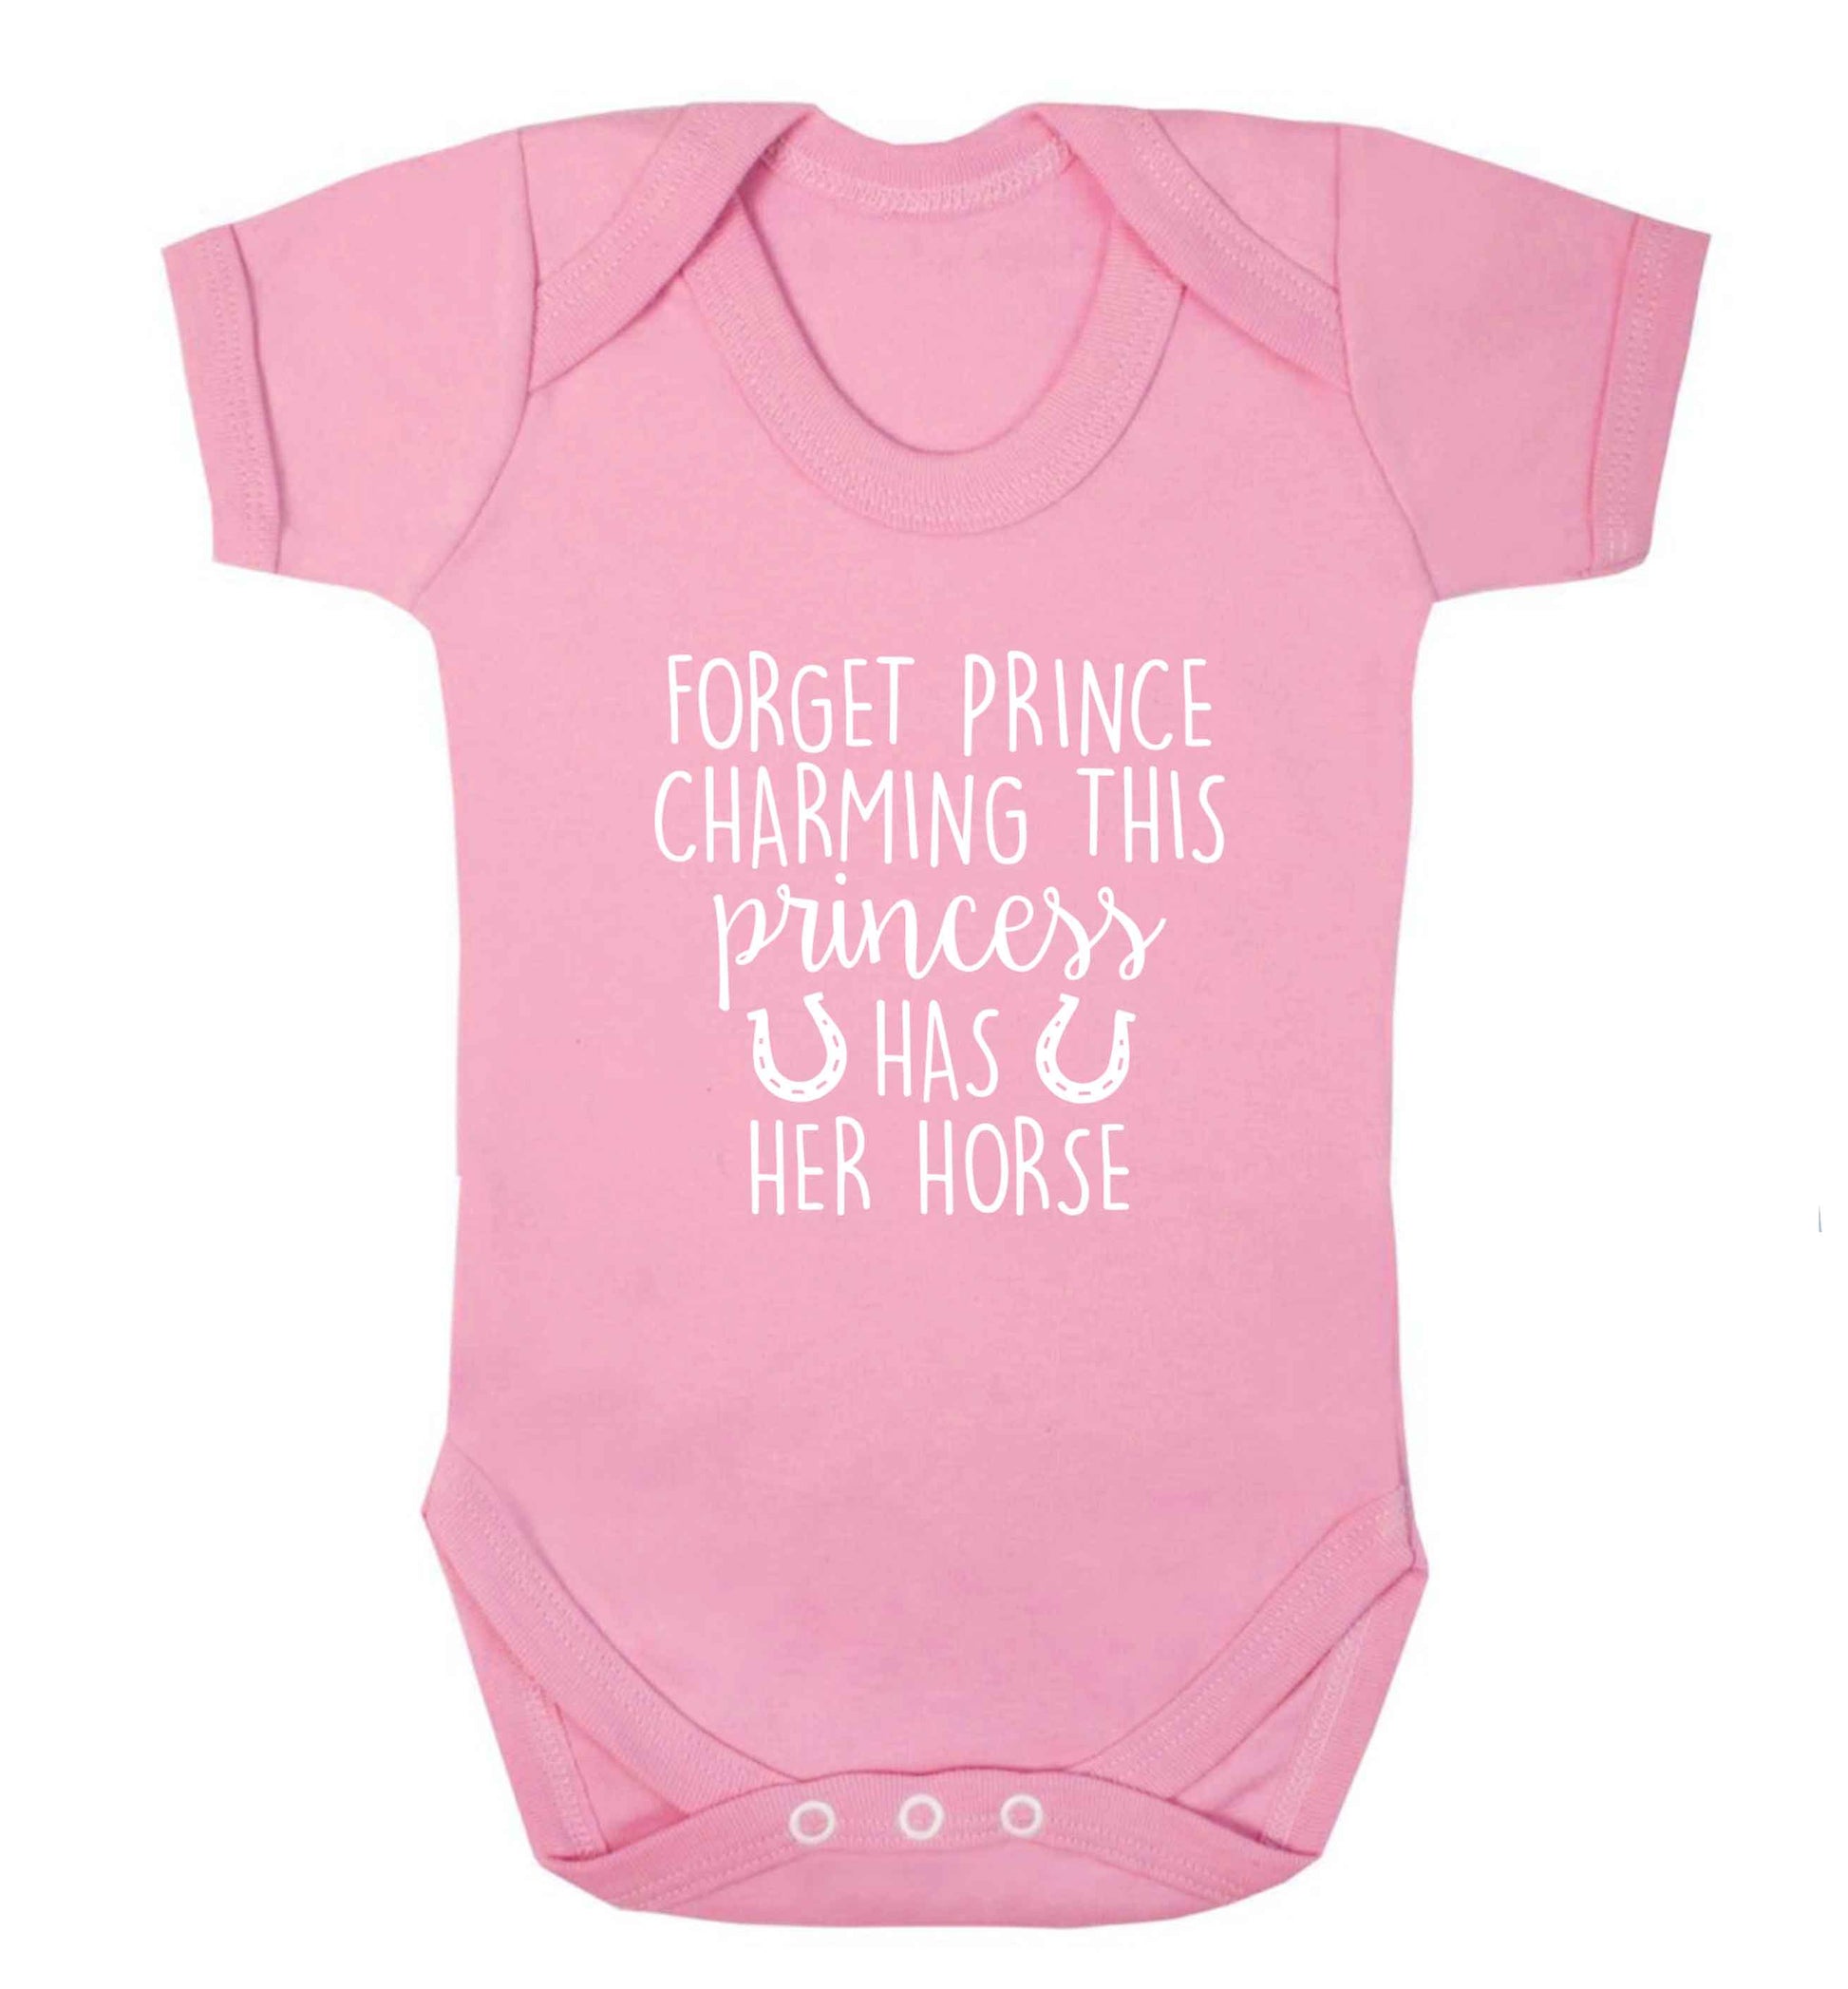 Forget prince charming this princess has her horse baby vest pale pink 18-24 months